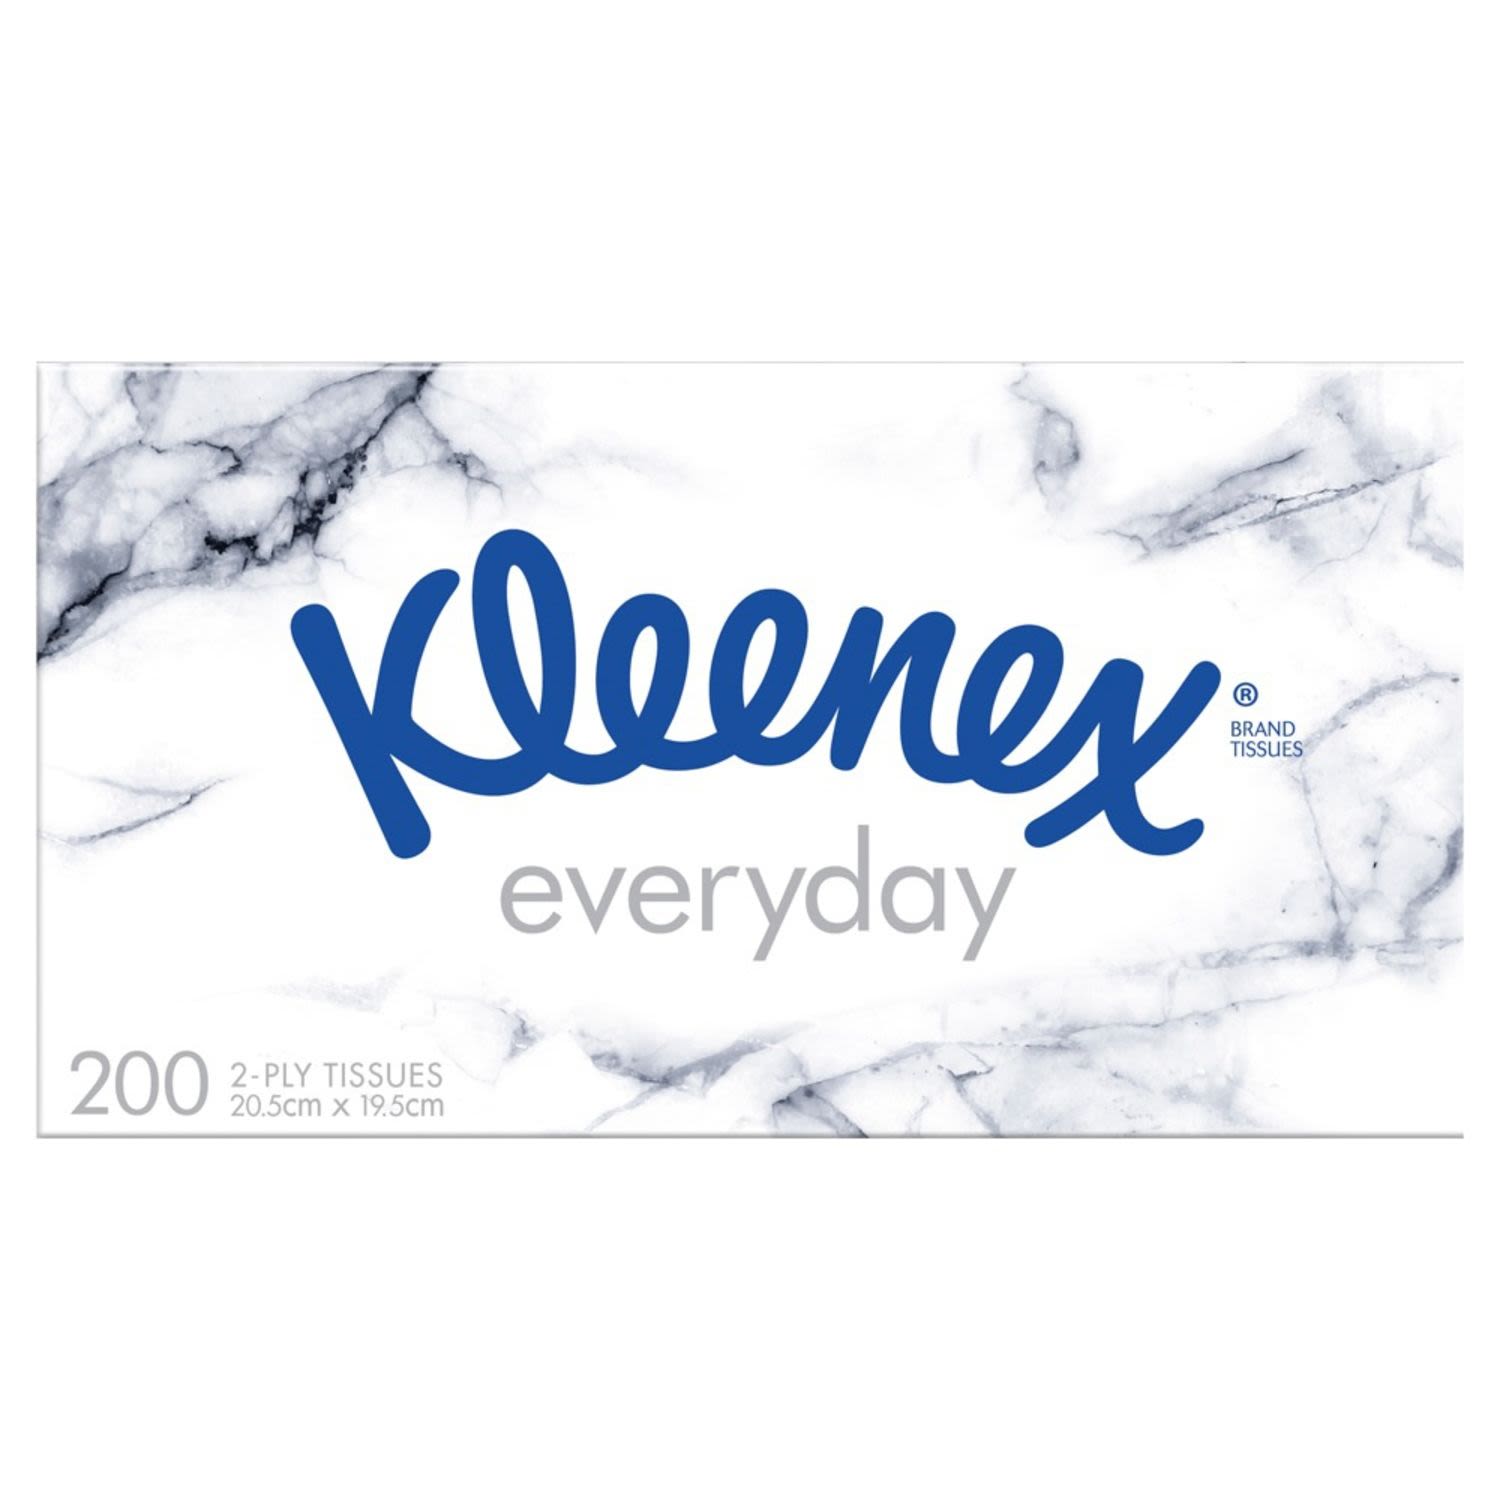 Kleenex Everyday tissues, for everyday laughs, tears, sniffles and family moments.

2-ply tissues, 200 sheets, 20.5cm x 19.5cm

Our Kleenex Facial Tissues are Aussie made and we’re proud of it; they’ve been made at our Millicent mill in South Australia since 1966. This means support for local communities, including hundreds of local employees and their families, each year.

FSC® Certified, ensuring responsible forest management, meeting the most rigorous environmental and social standard for responsible forest management.<br /> <br />